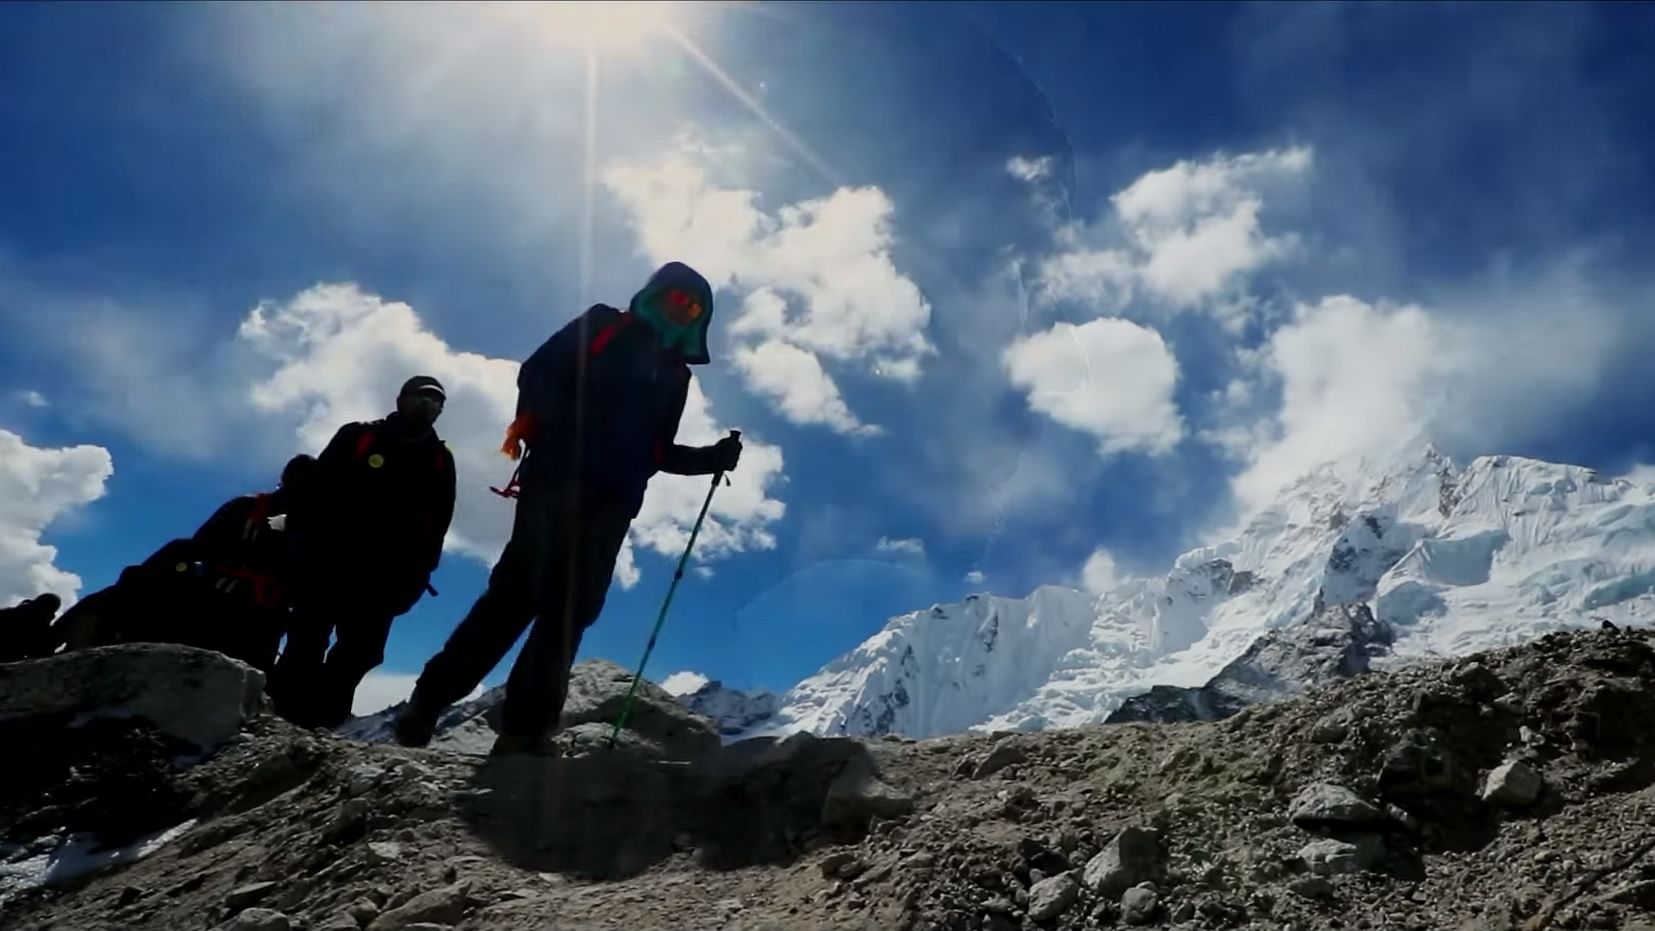 Conquering your personal Everest starts with one small step